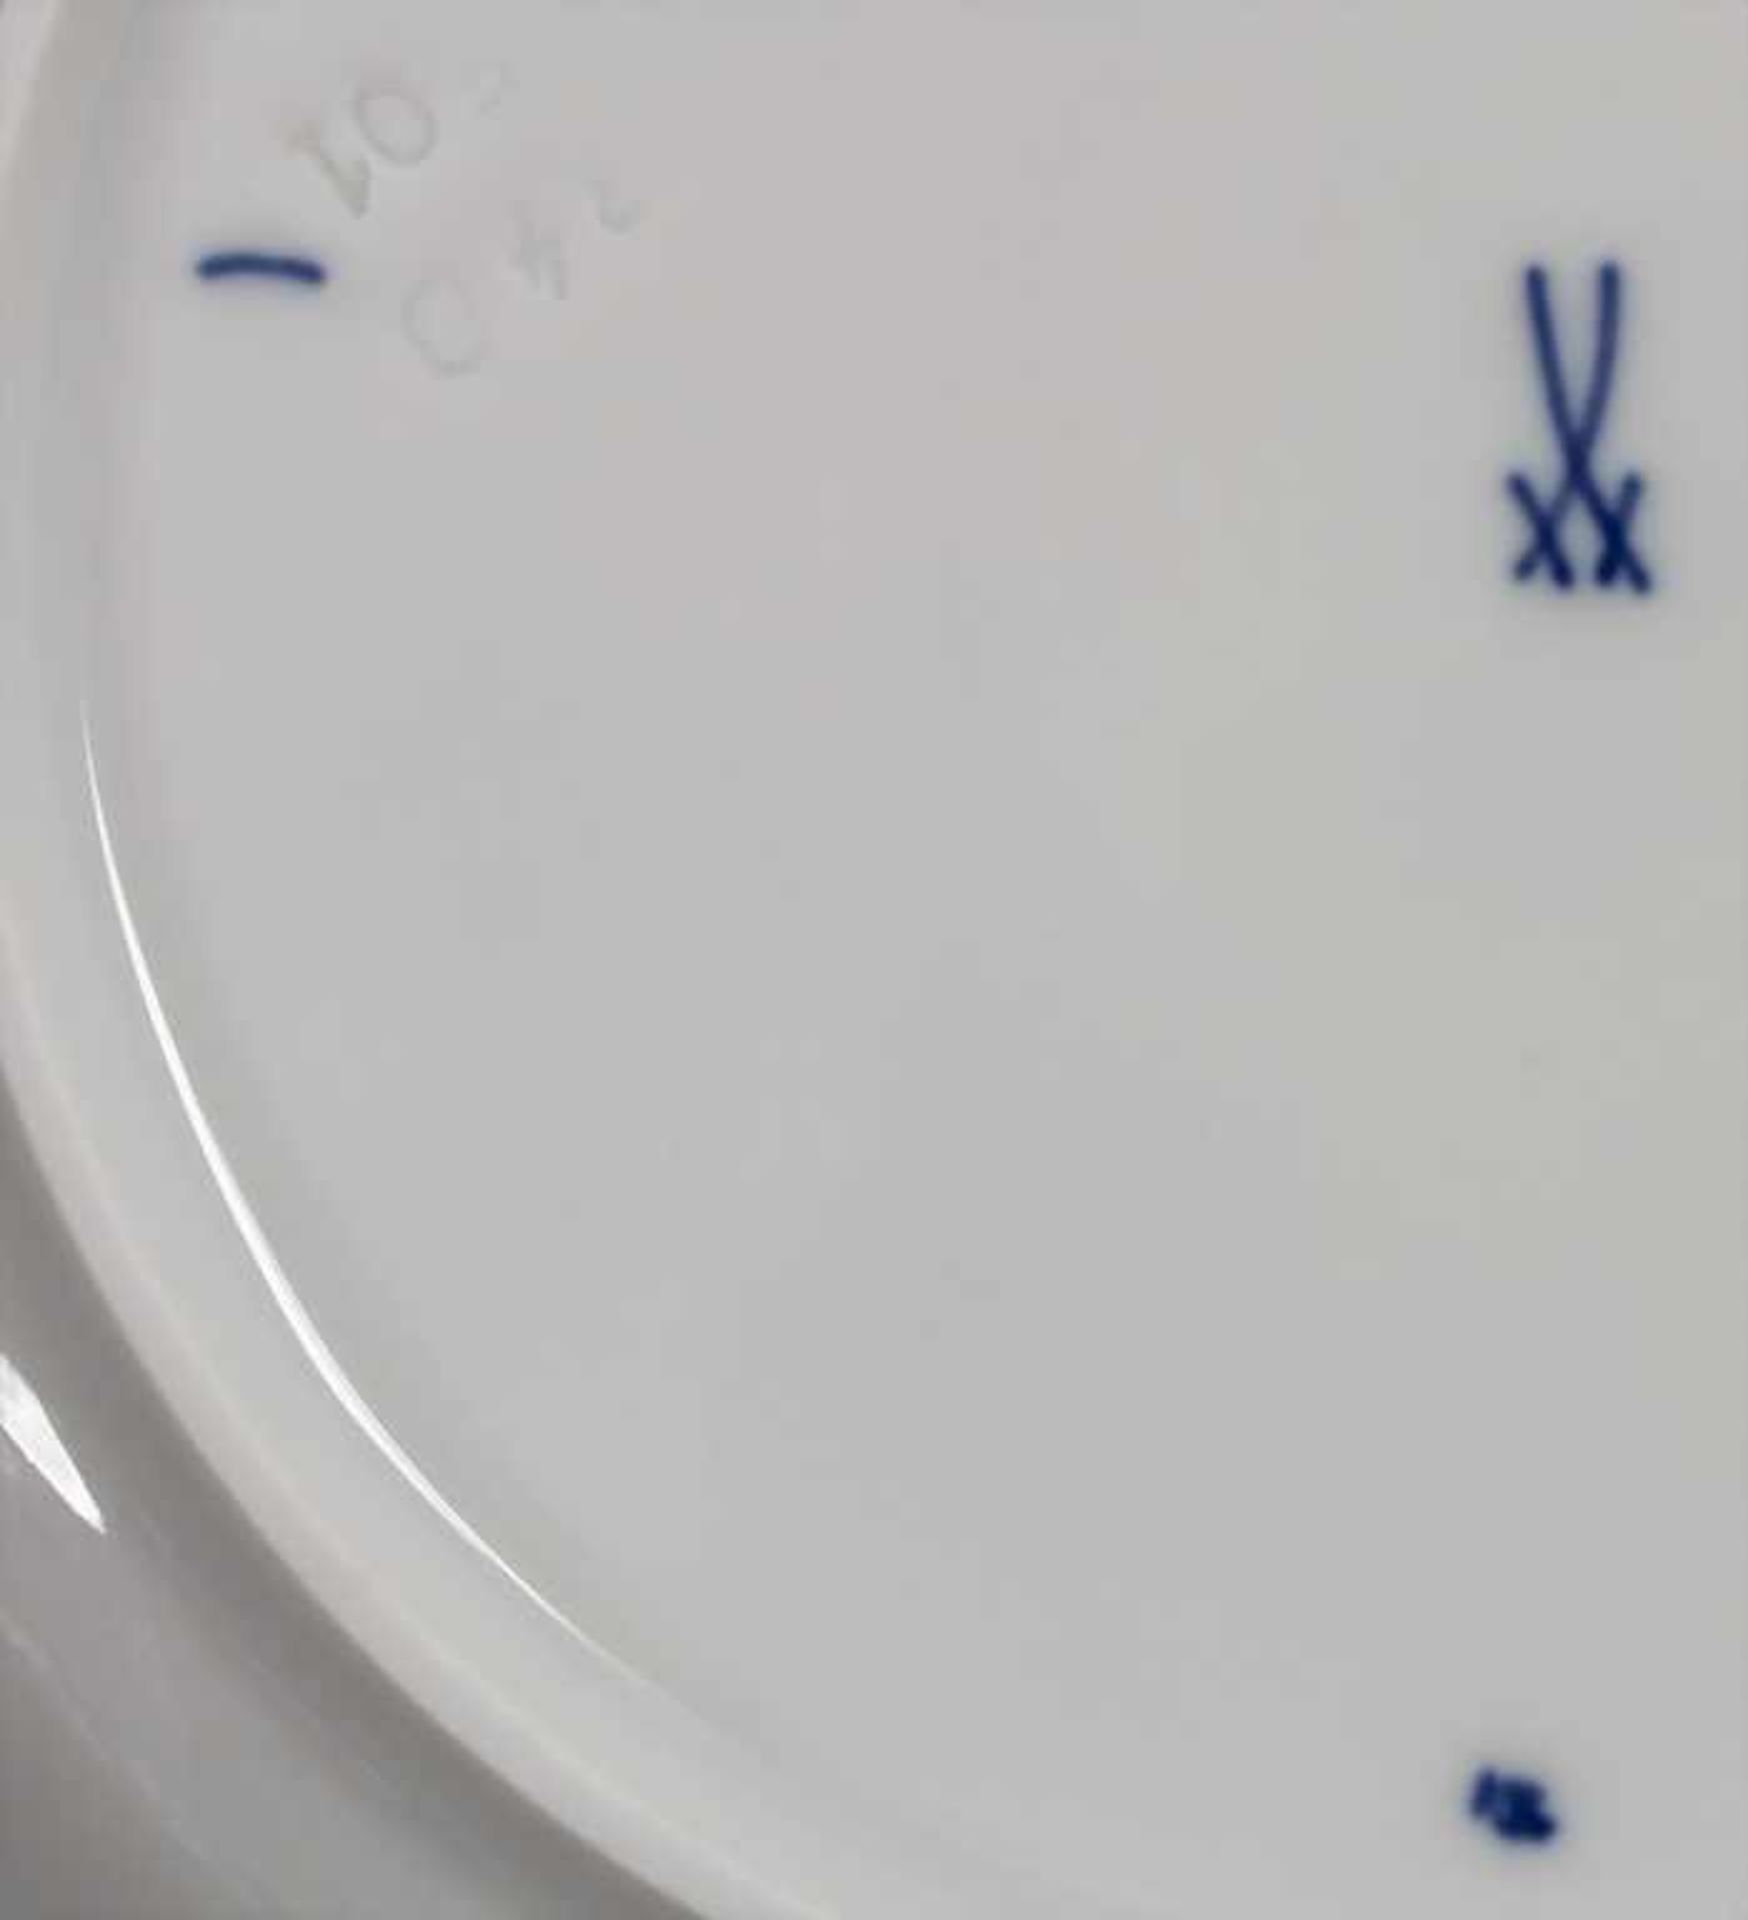 28 tlg. Service 'Zwiebelmuster' / A 28-piece dinner set with 'Onion Pattern', Meissen, 20. Jh. - Image 17 of 17